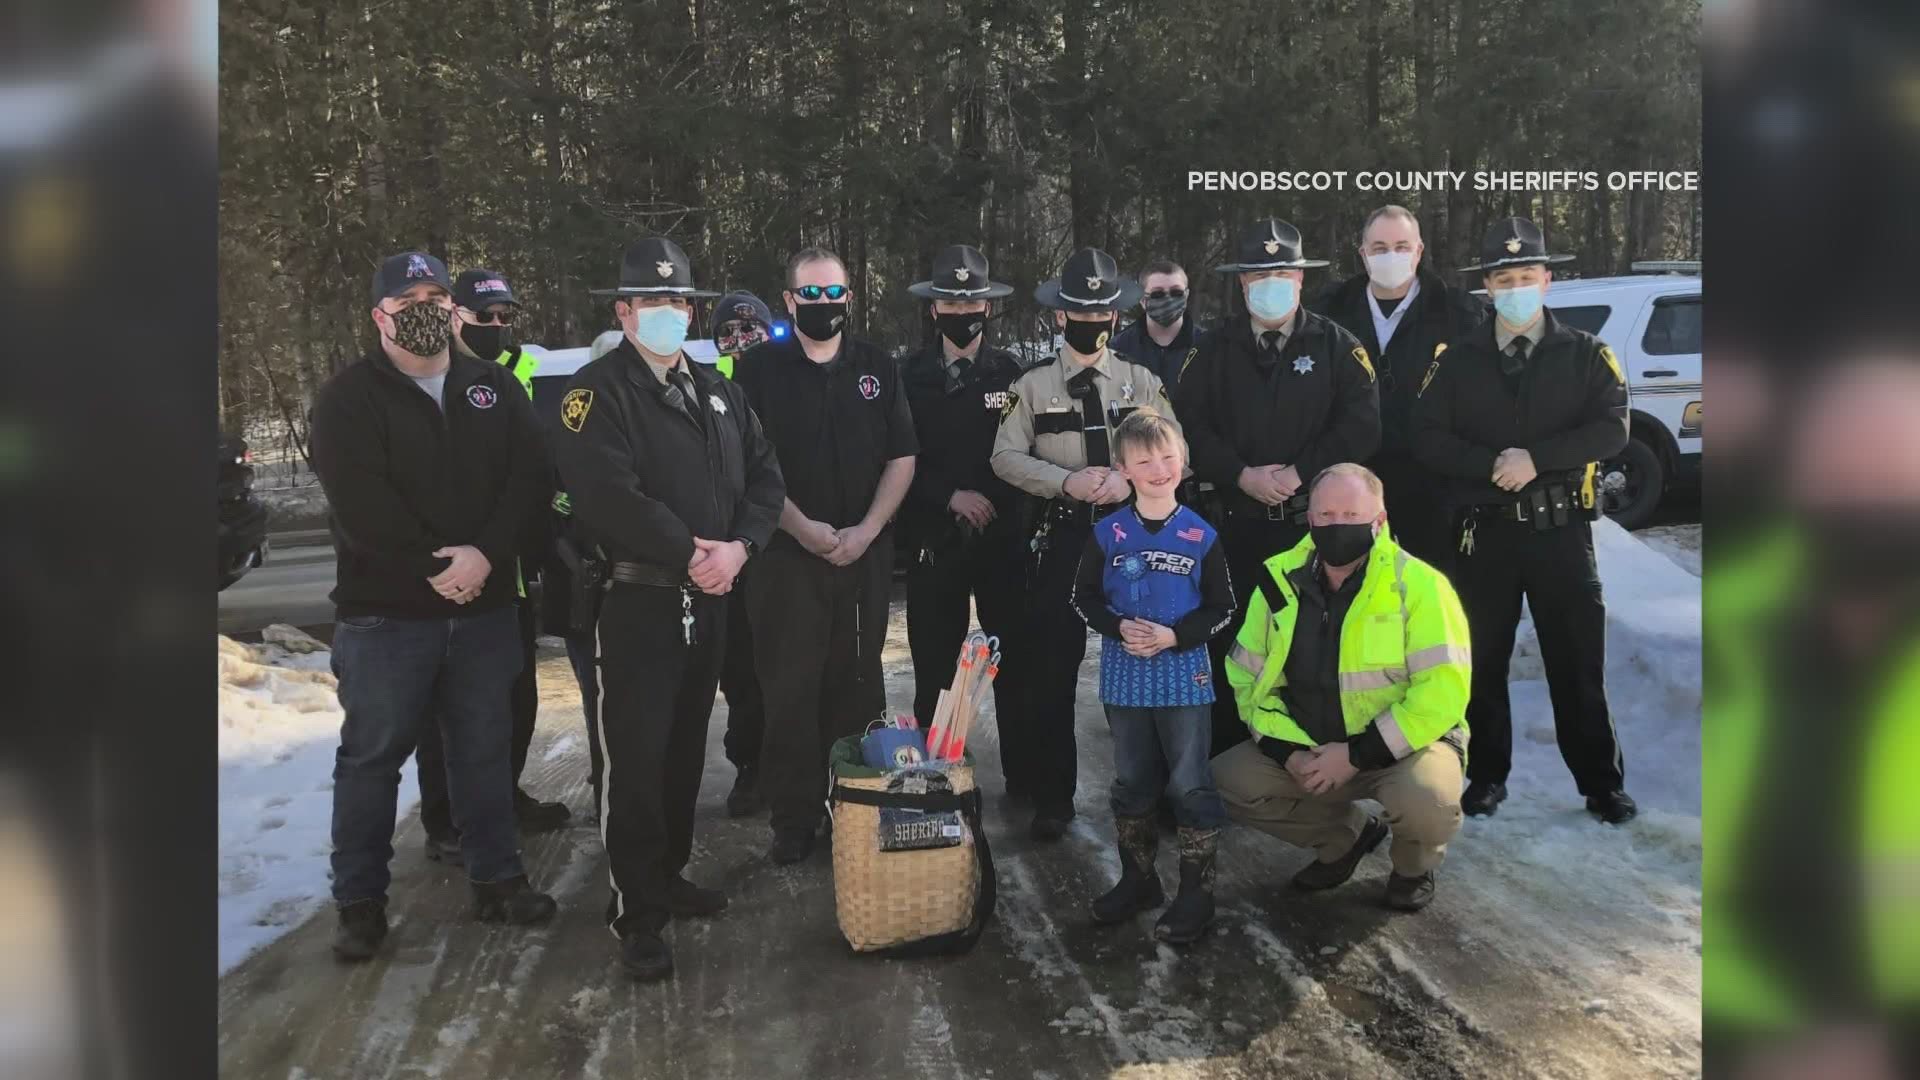 Maine town officials host birthday celebration for boy who paid for sheriff's deputy lunch